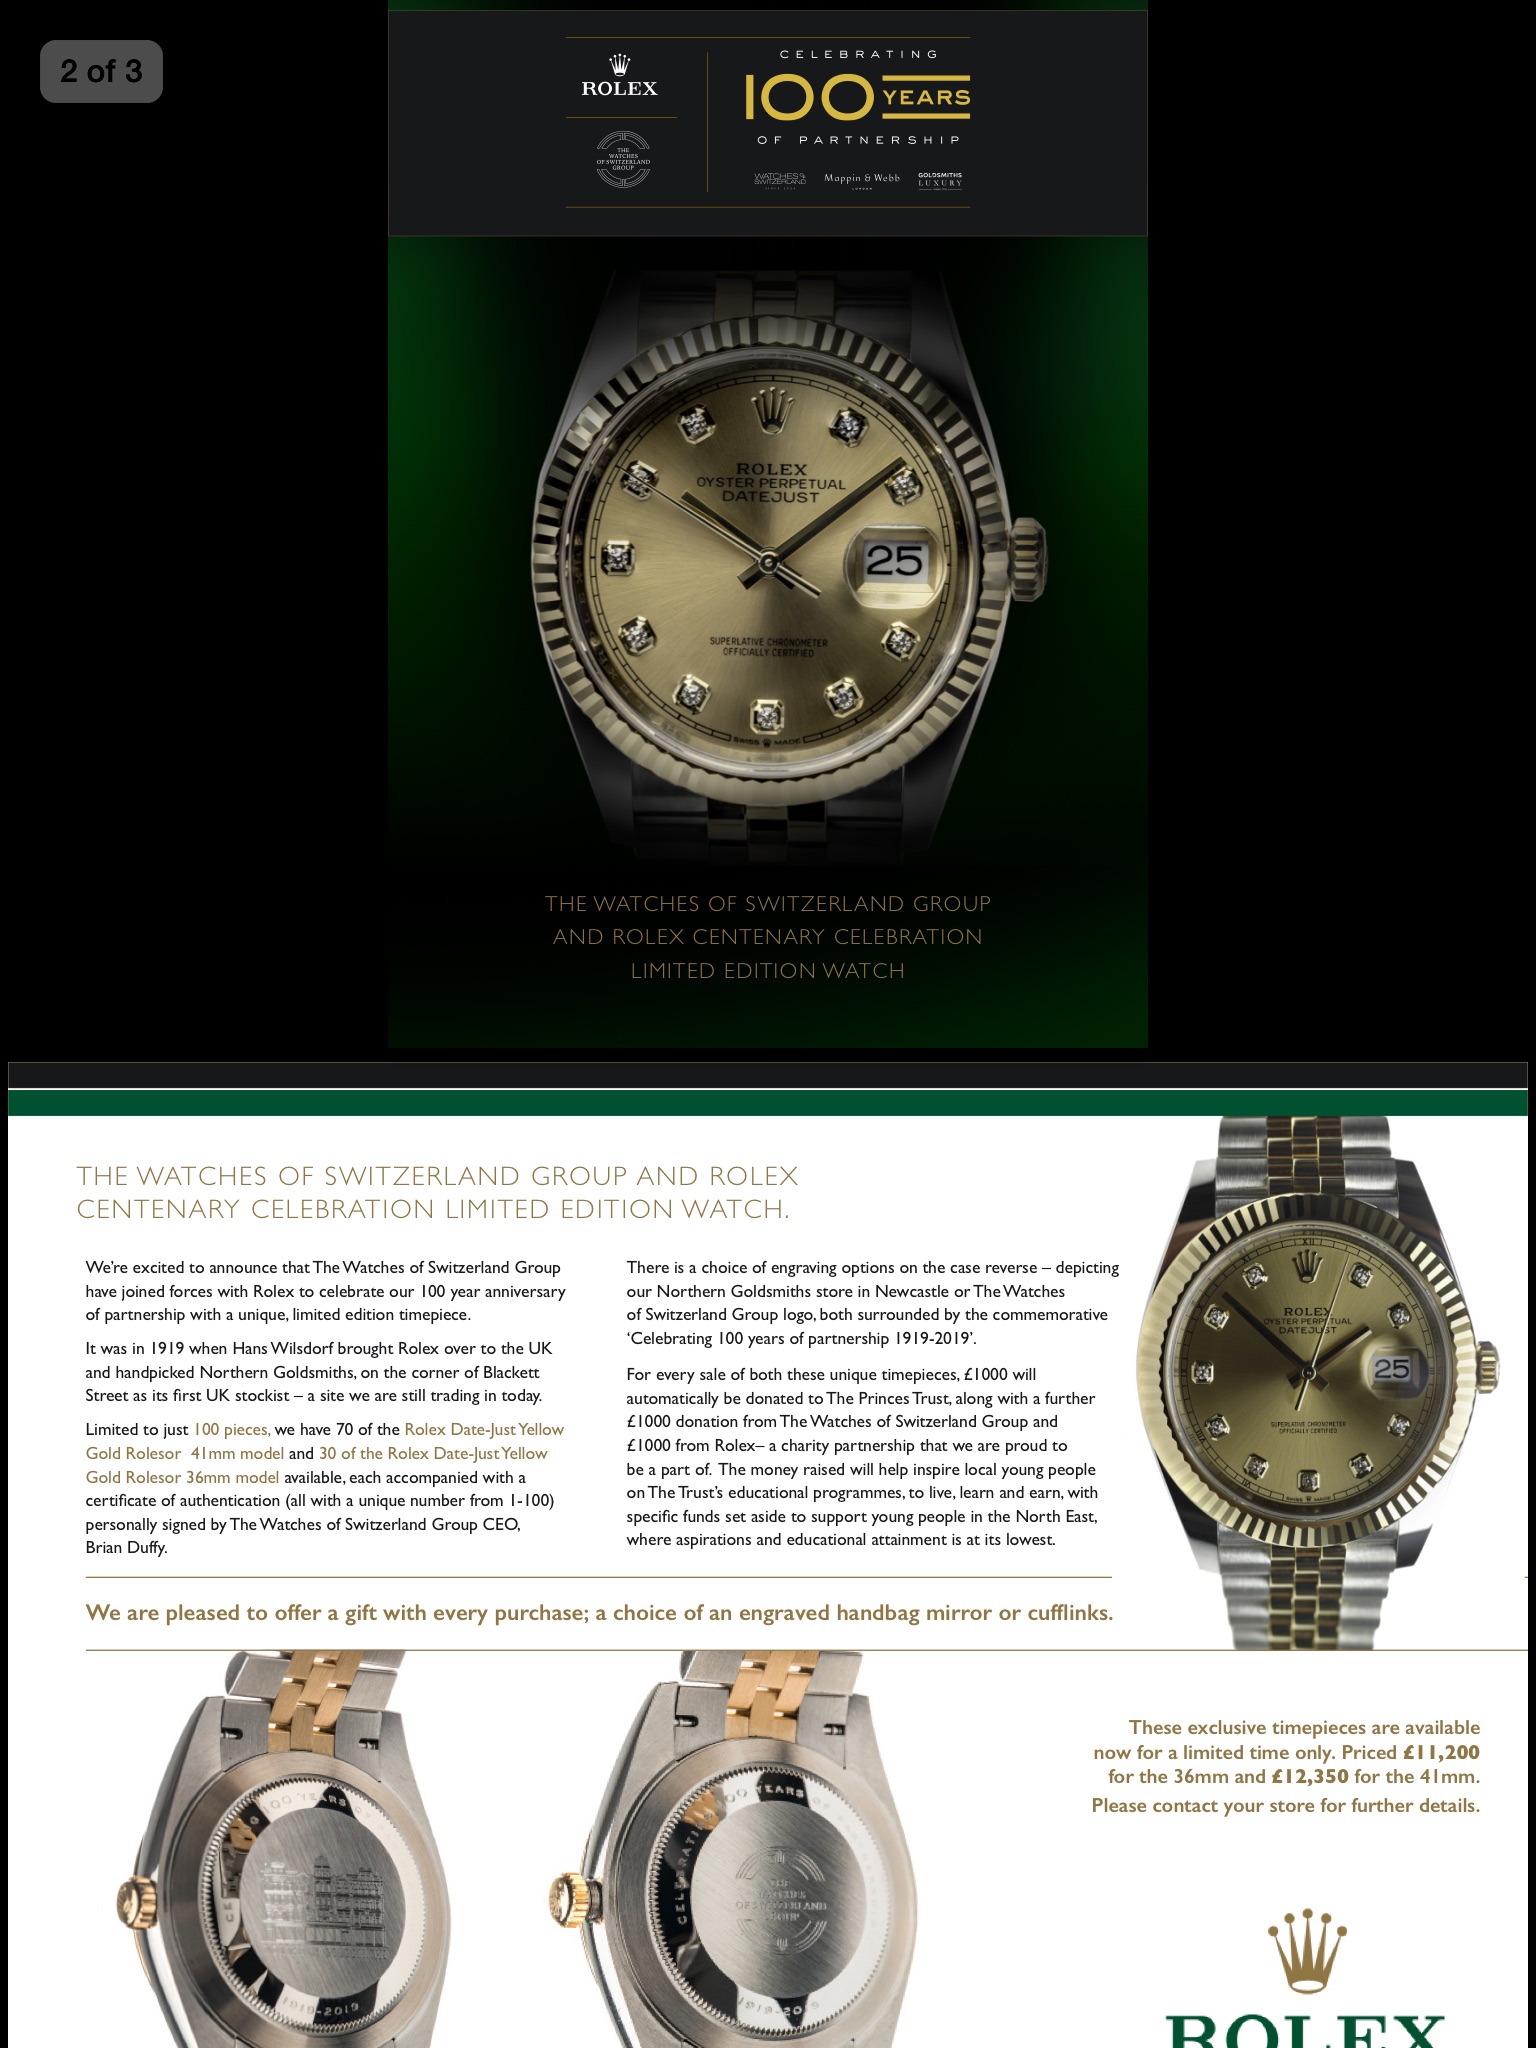 Rolex and WOS 100 years anniversary 